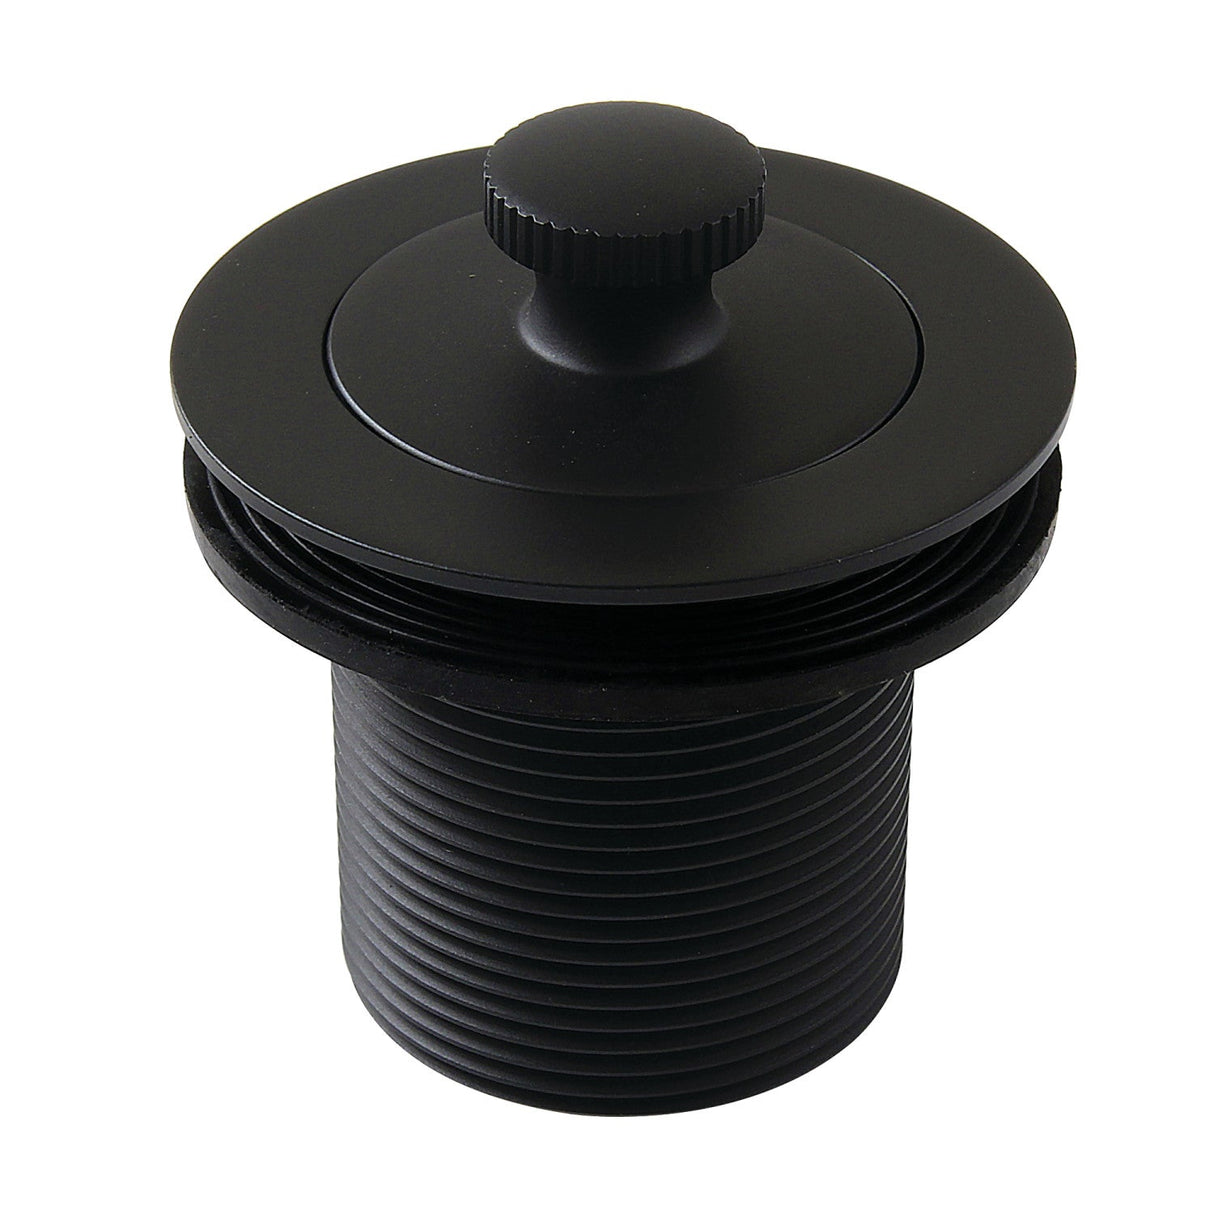 Made To Match DLT17MB 1-1/2-Inch Lift and Turn Tub Drain with 1-3/4-Inch Body Thread, Matte Black